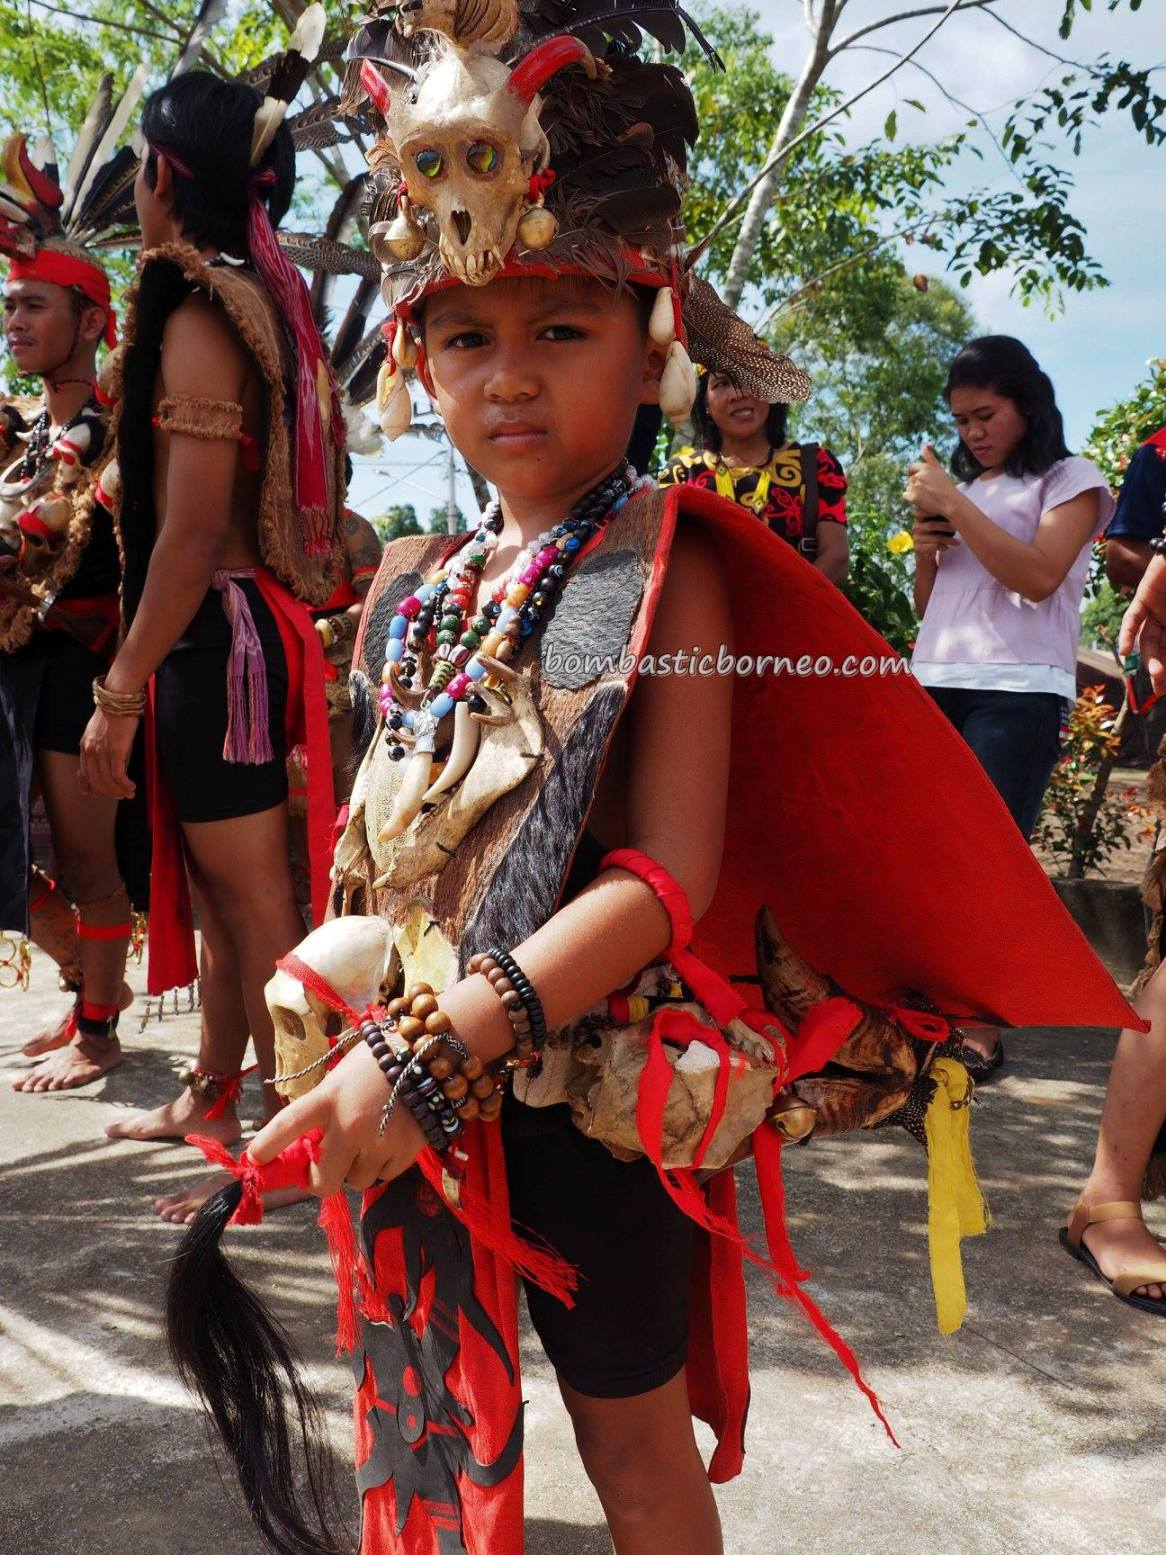 paddy harvest festival, authentic, indigenous, traditional, culture, event, Indonesia, West Kalimantan, ethnic, native, tribe, wisata budaya, Tourism, trans border, 印尼西加里曼丹, 传统土著文化旅游